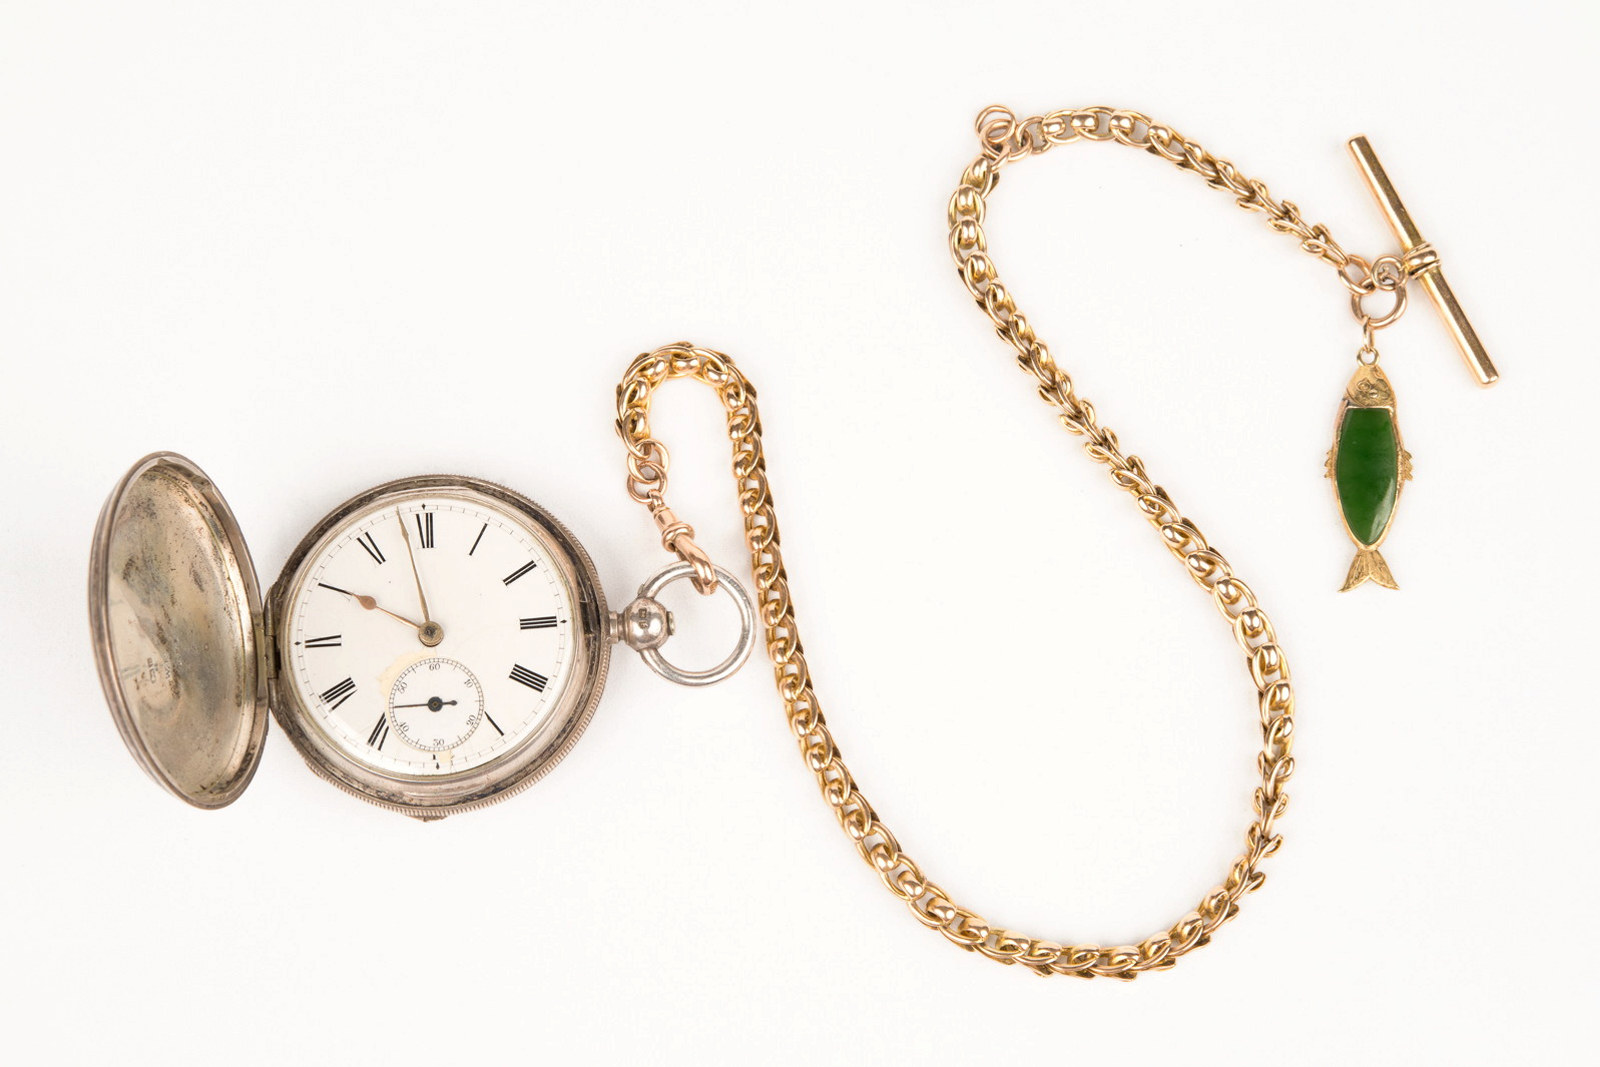 Pocket watch and watch chain with small jade fish attached, owned by Hugo Youngein who operated shop at Susannah Place